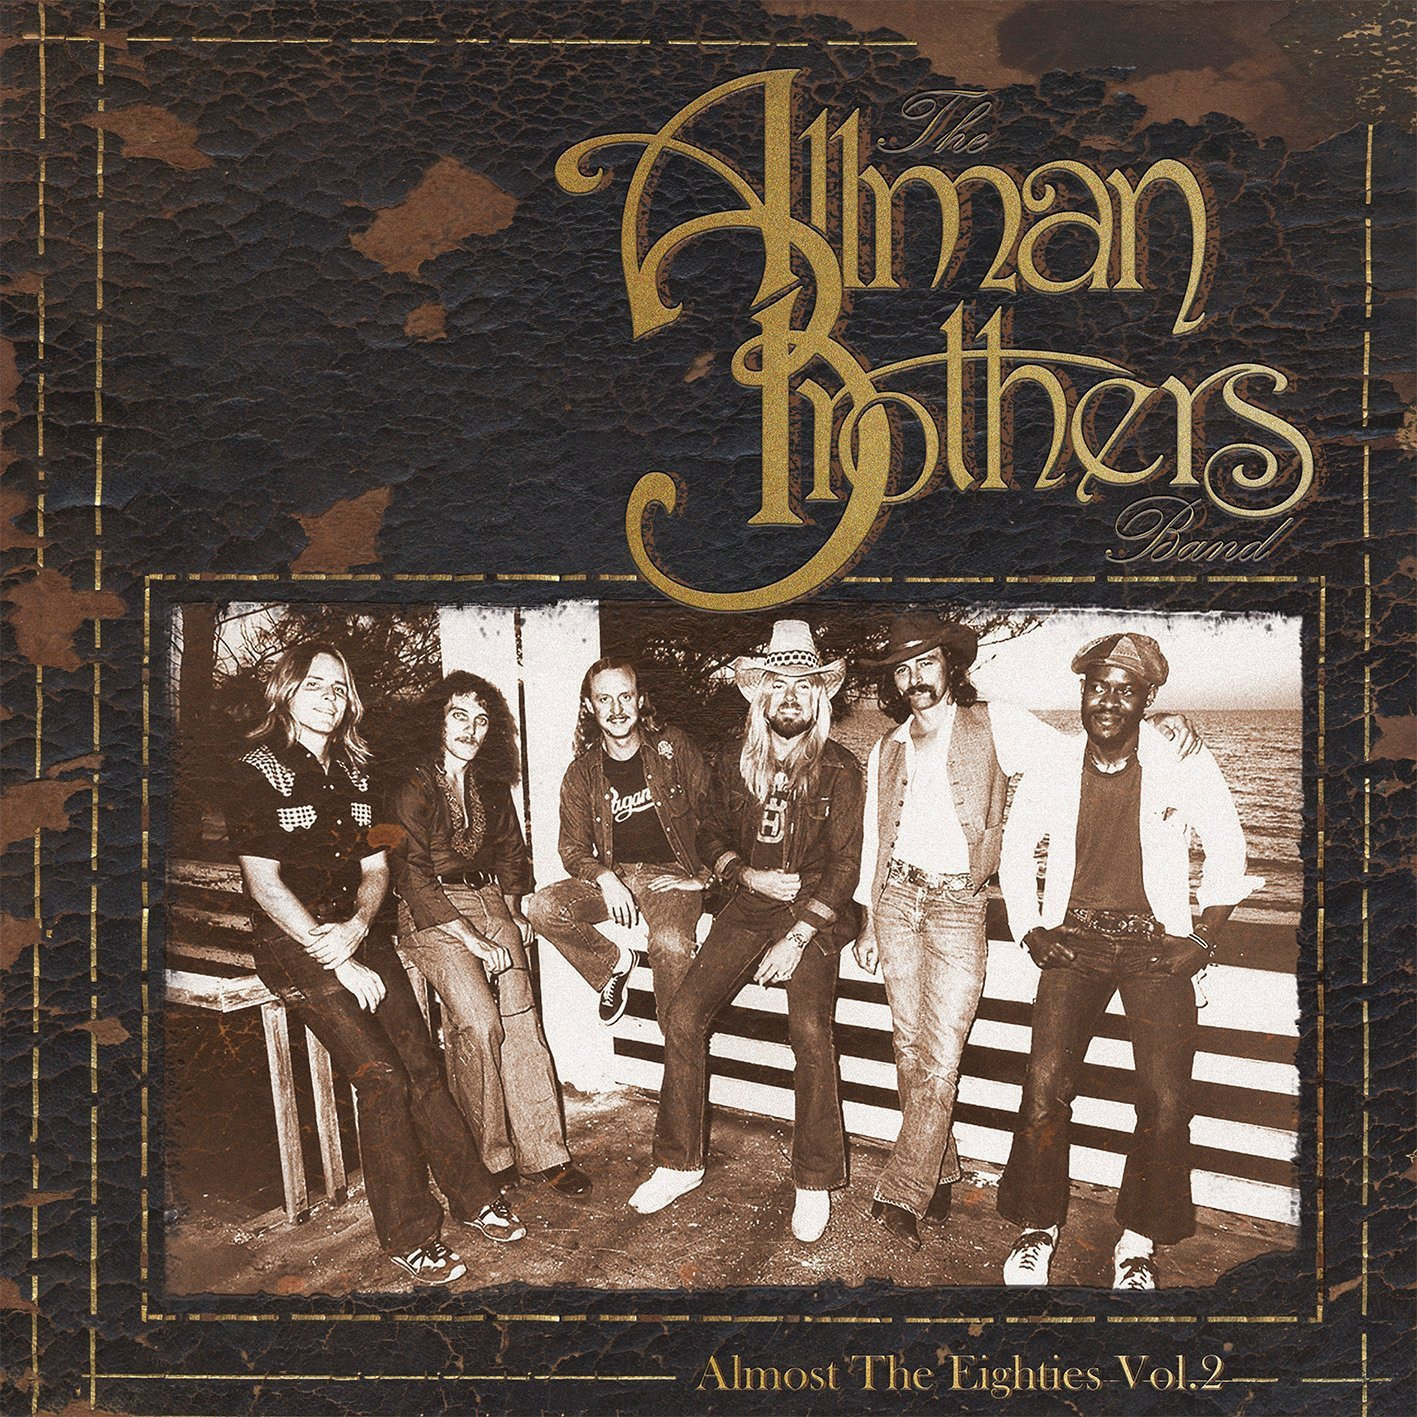 Vinyl Record The Allman Brothers Band - Almost The Eighties Vol. 2 (2 LP)